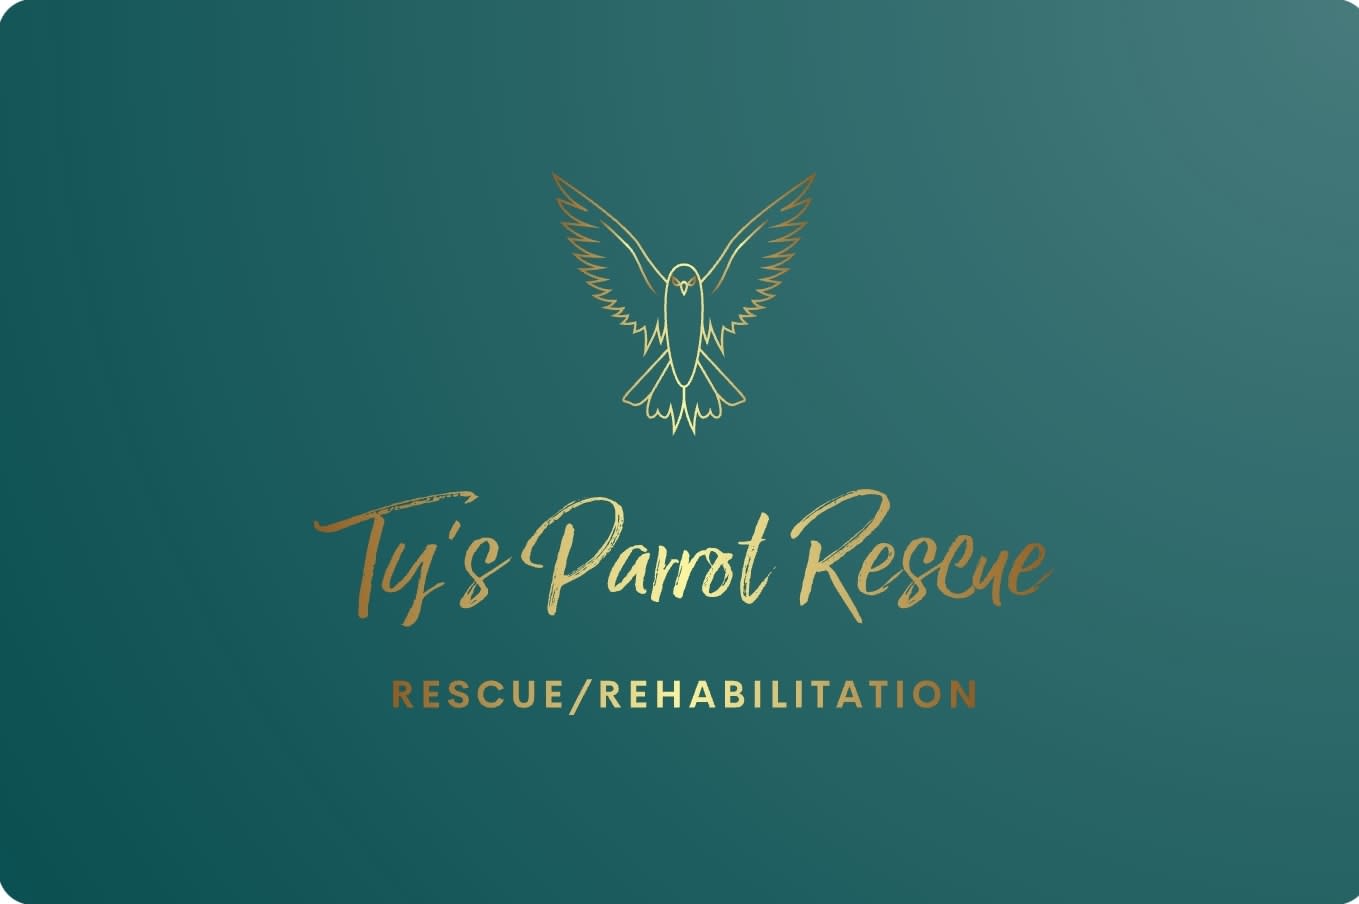 Ty's Parrot Rescue